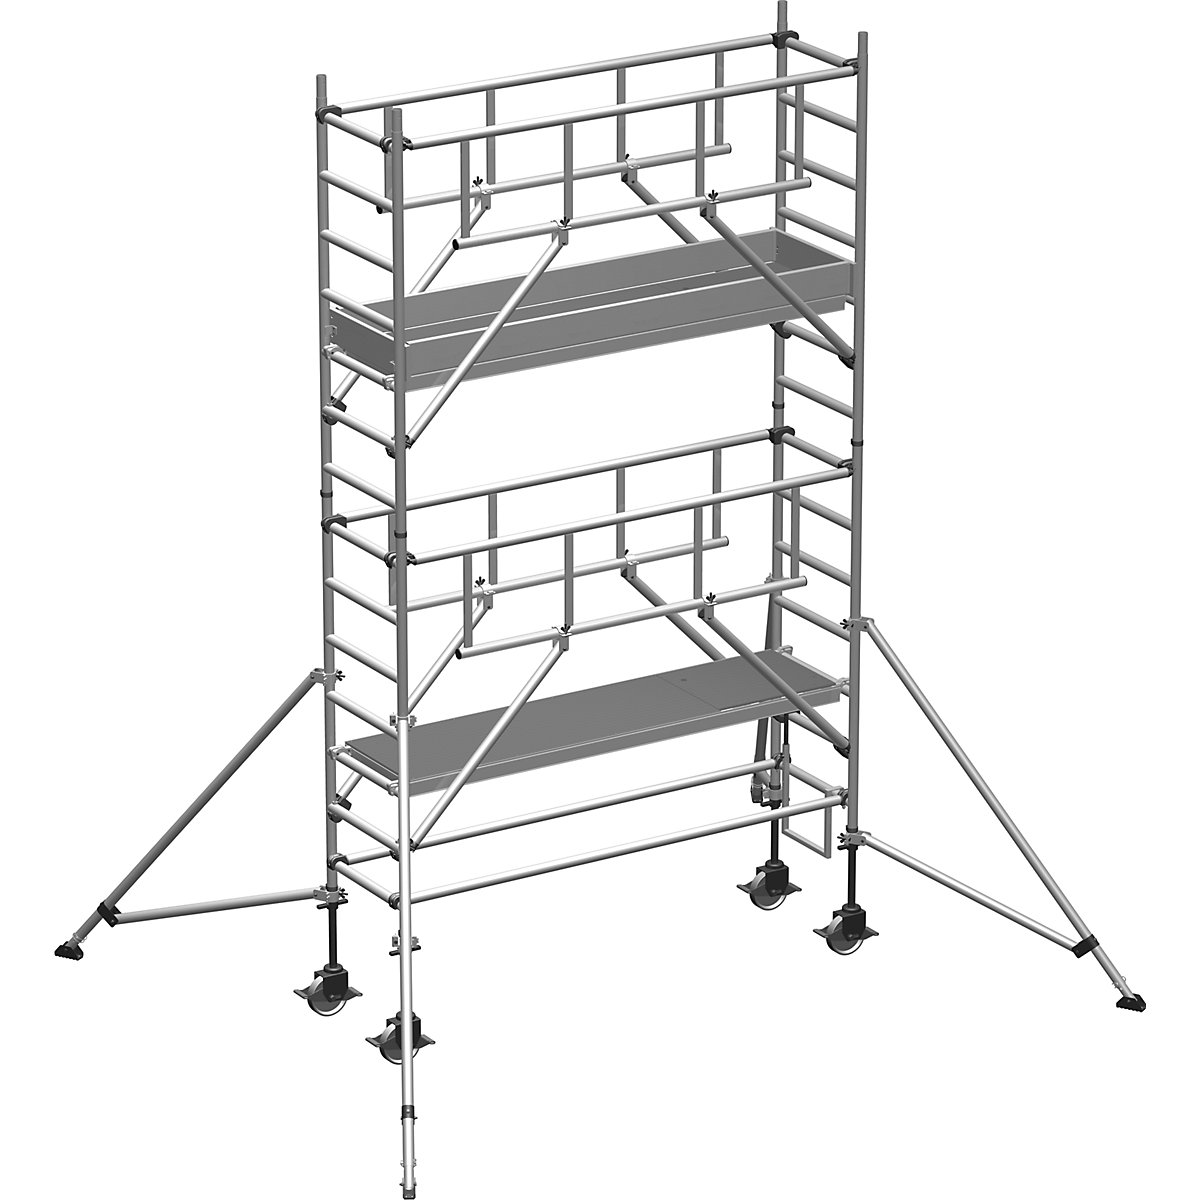 S-PLUS mobile access tower – ZARGES, platform 1.80 x 0.60 m, working height 5.35 m